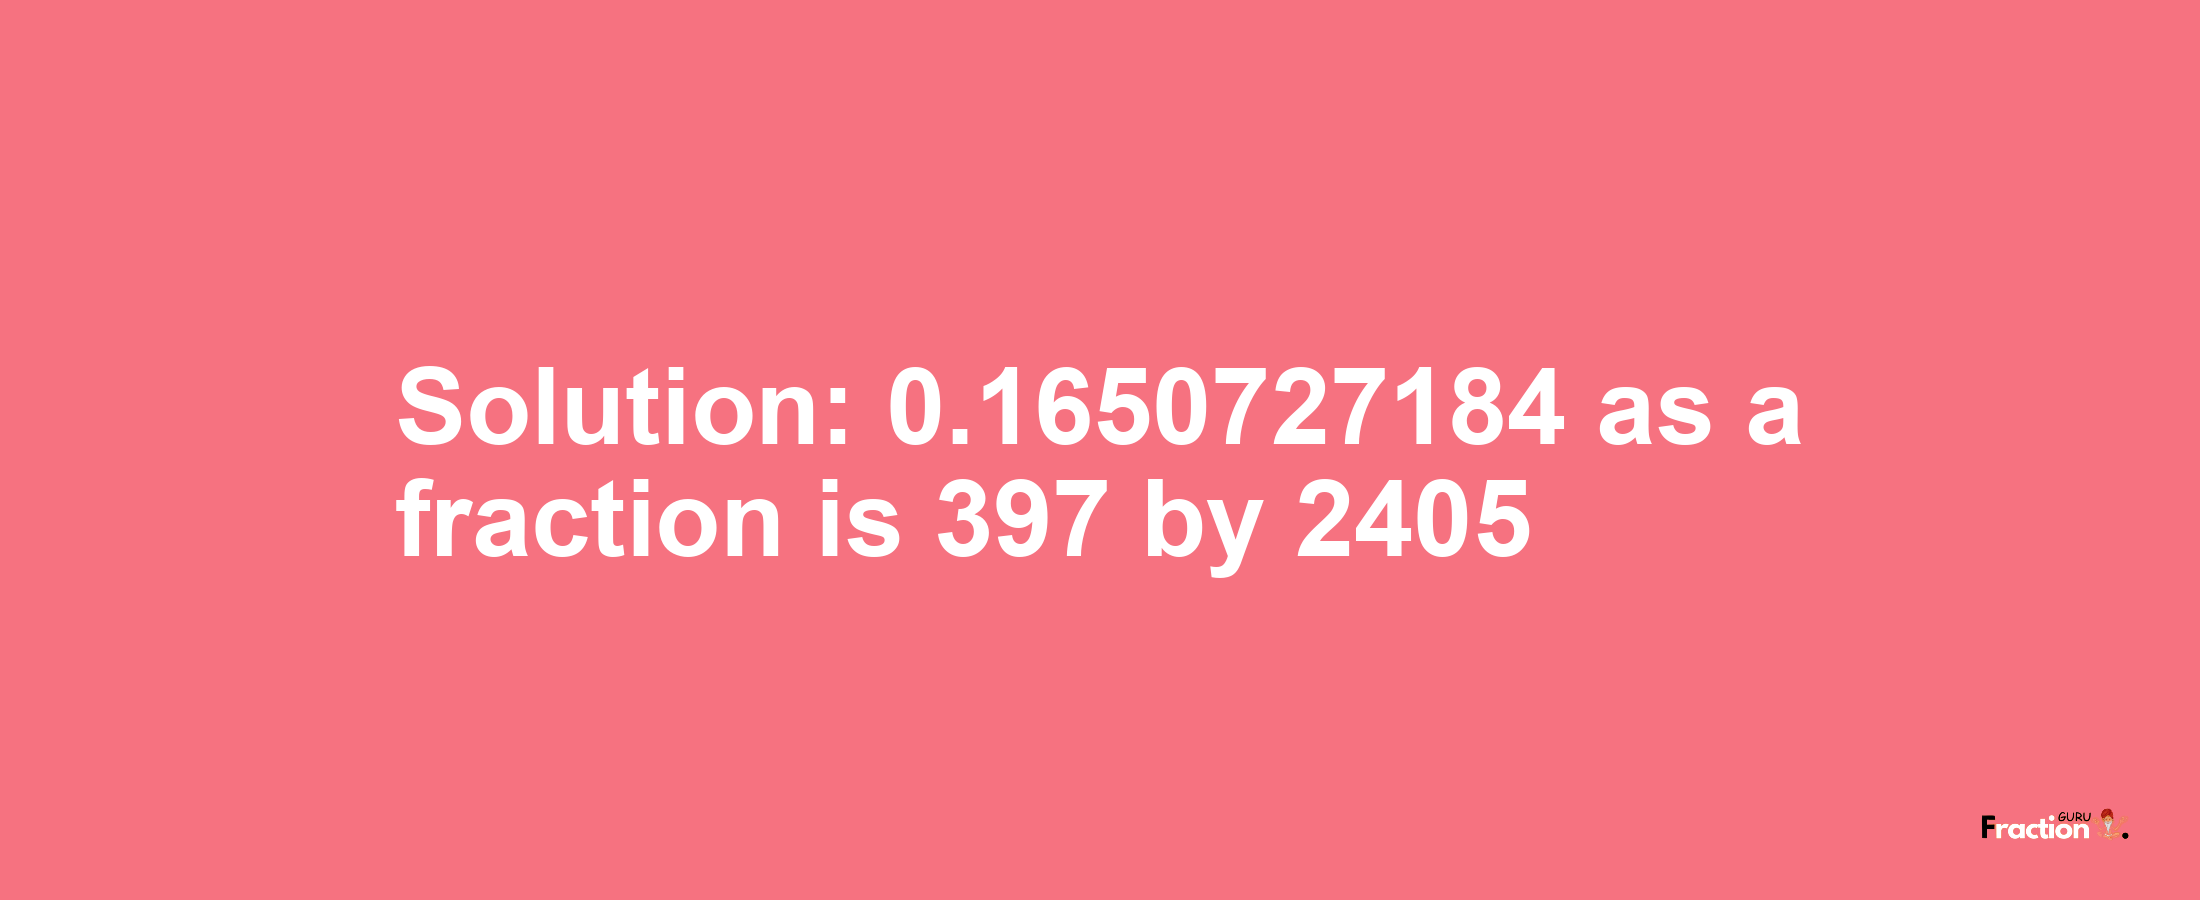 Solution:0.1650727184 as a fraction is 397/2405